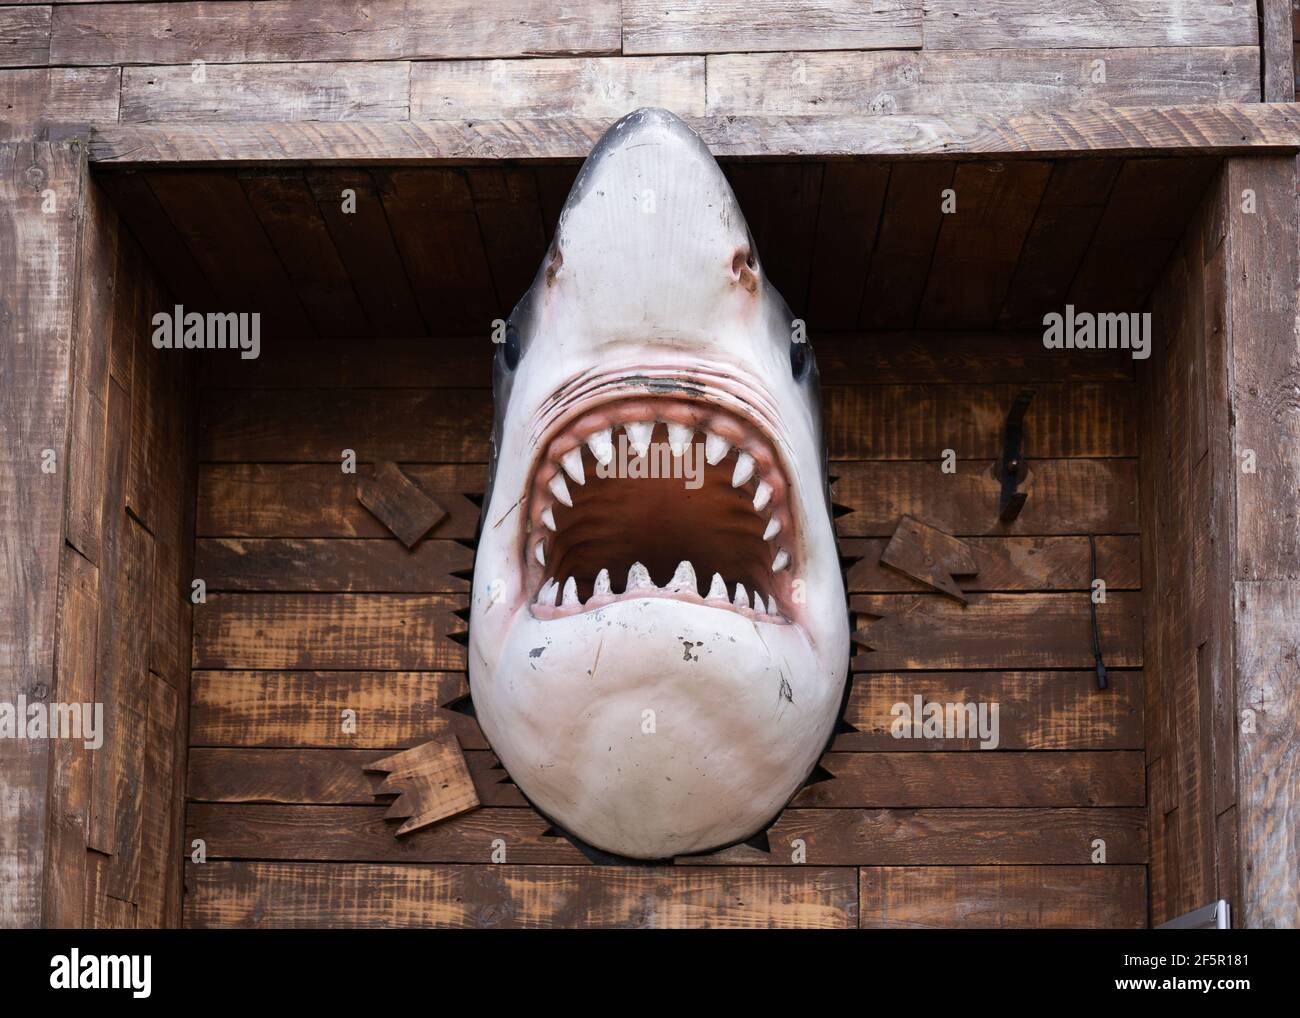 Frightening scary killer white shark breaking through wooden wall of aquarium fish tank bursting out with sharp teeth jaw showing and mouth wide open Stock Photo